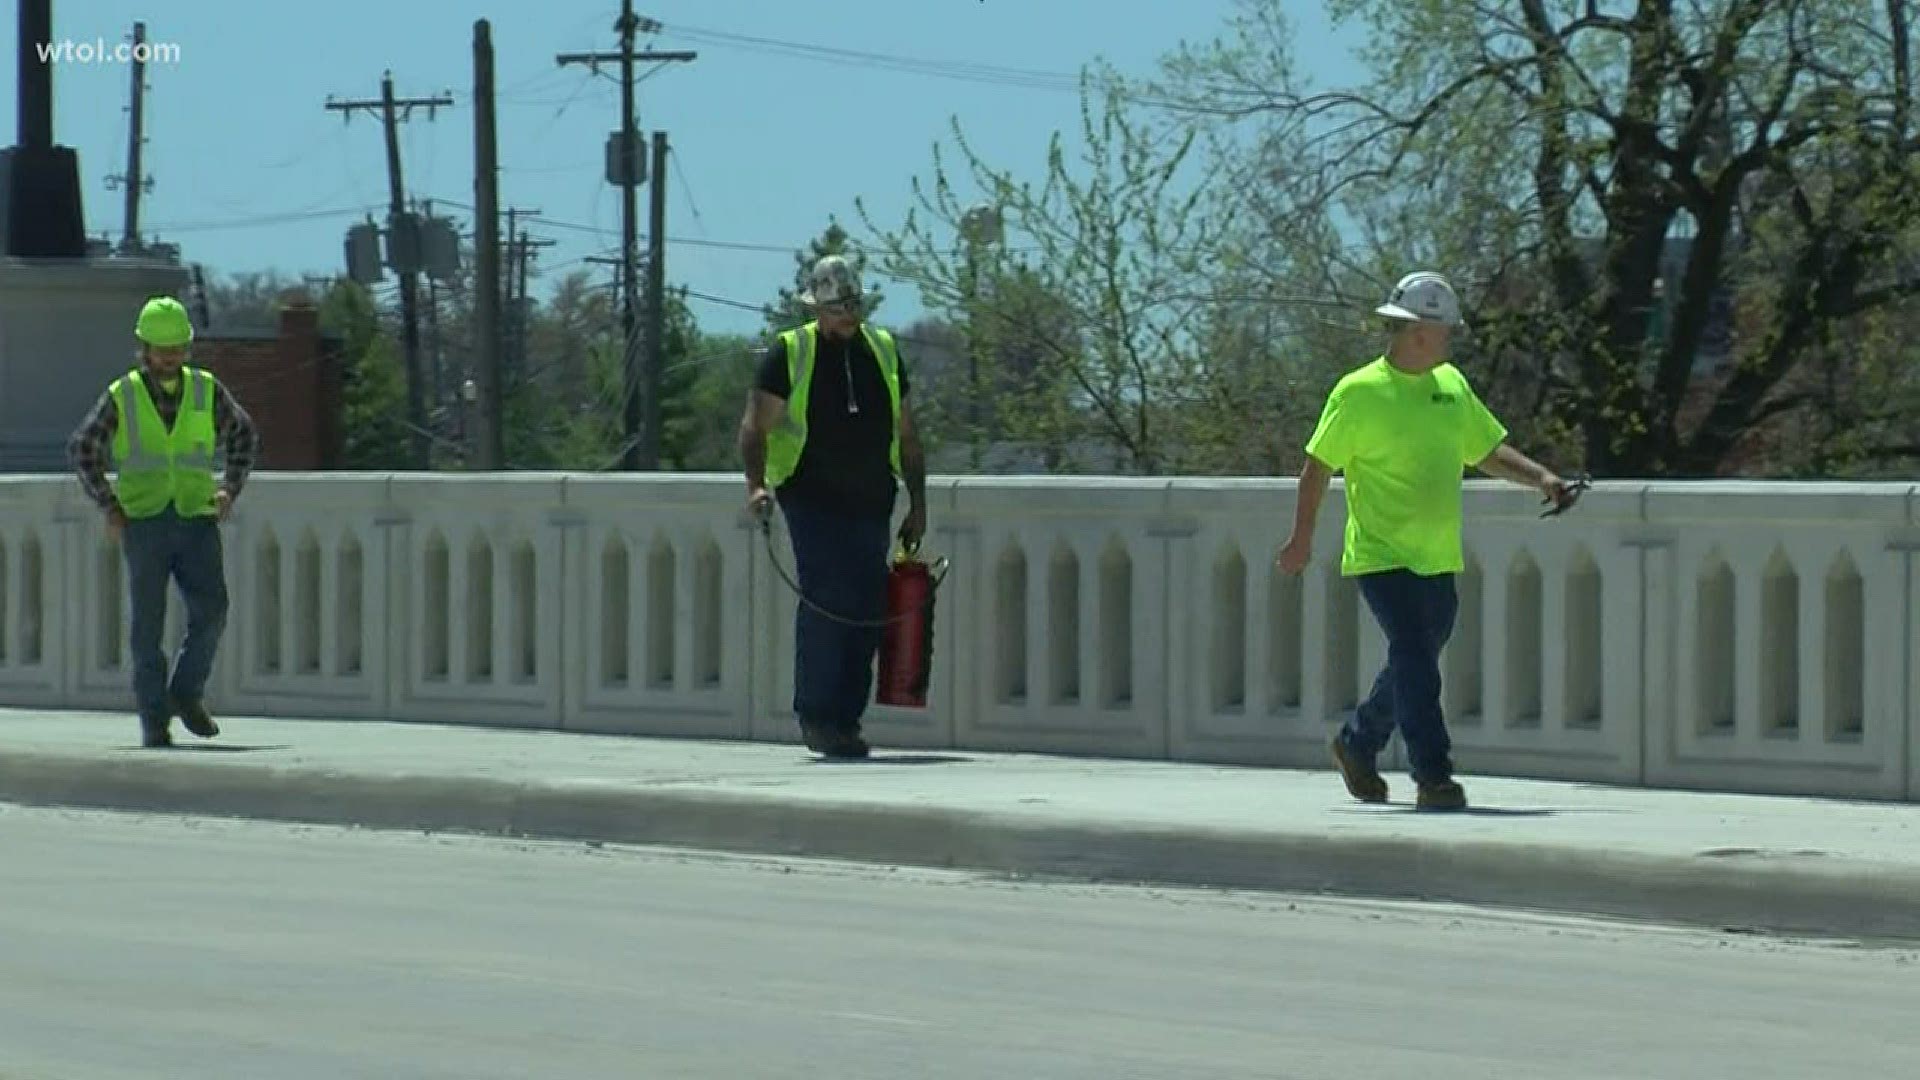 ODOT workers across northwest Ohio have continued projects and maintenance despite the coronavirus outbreak.